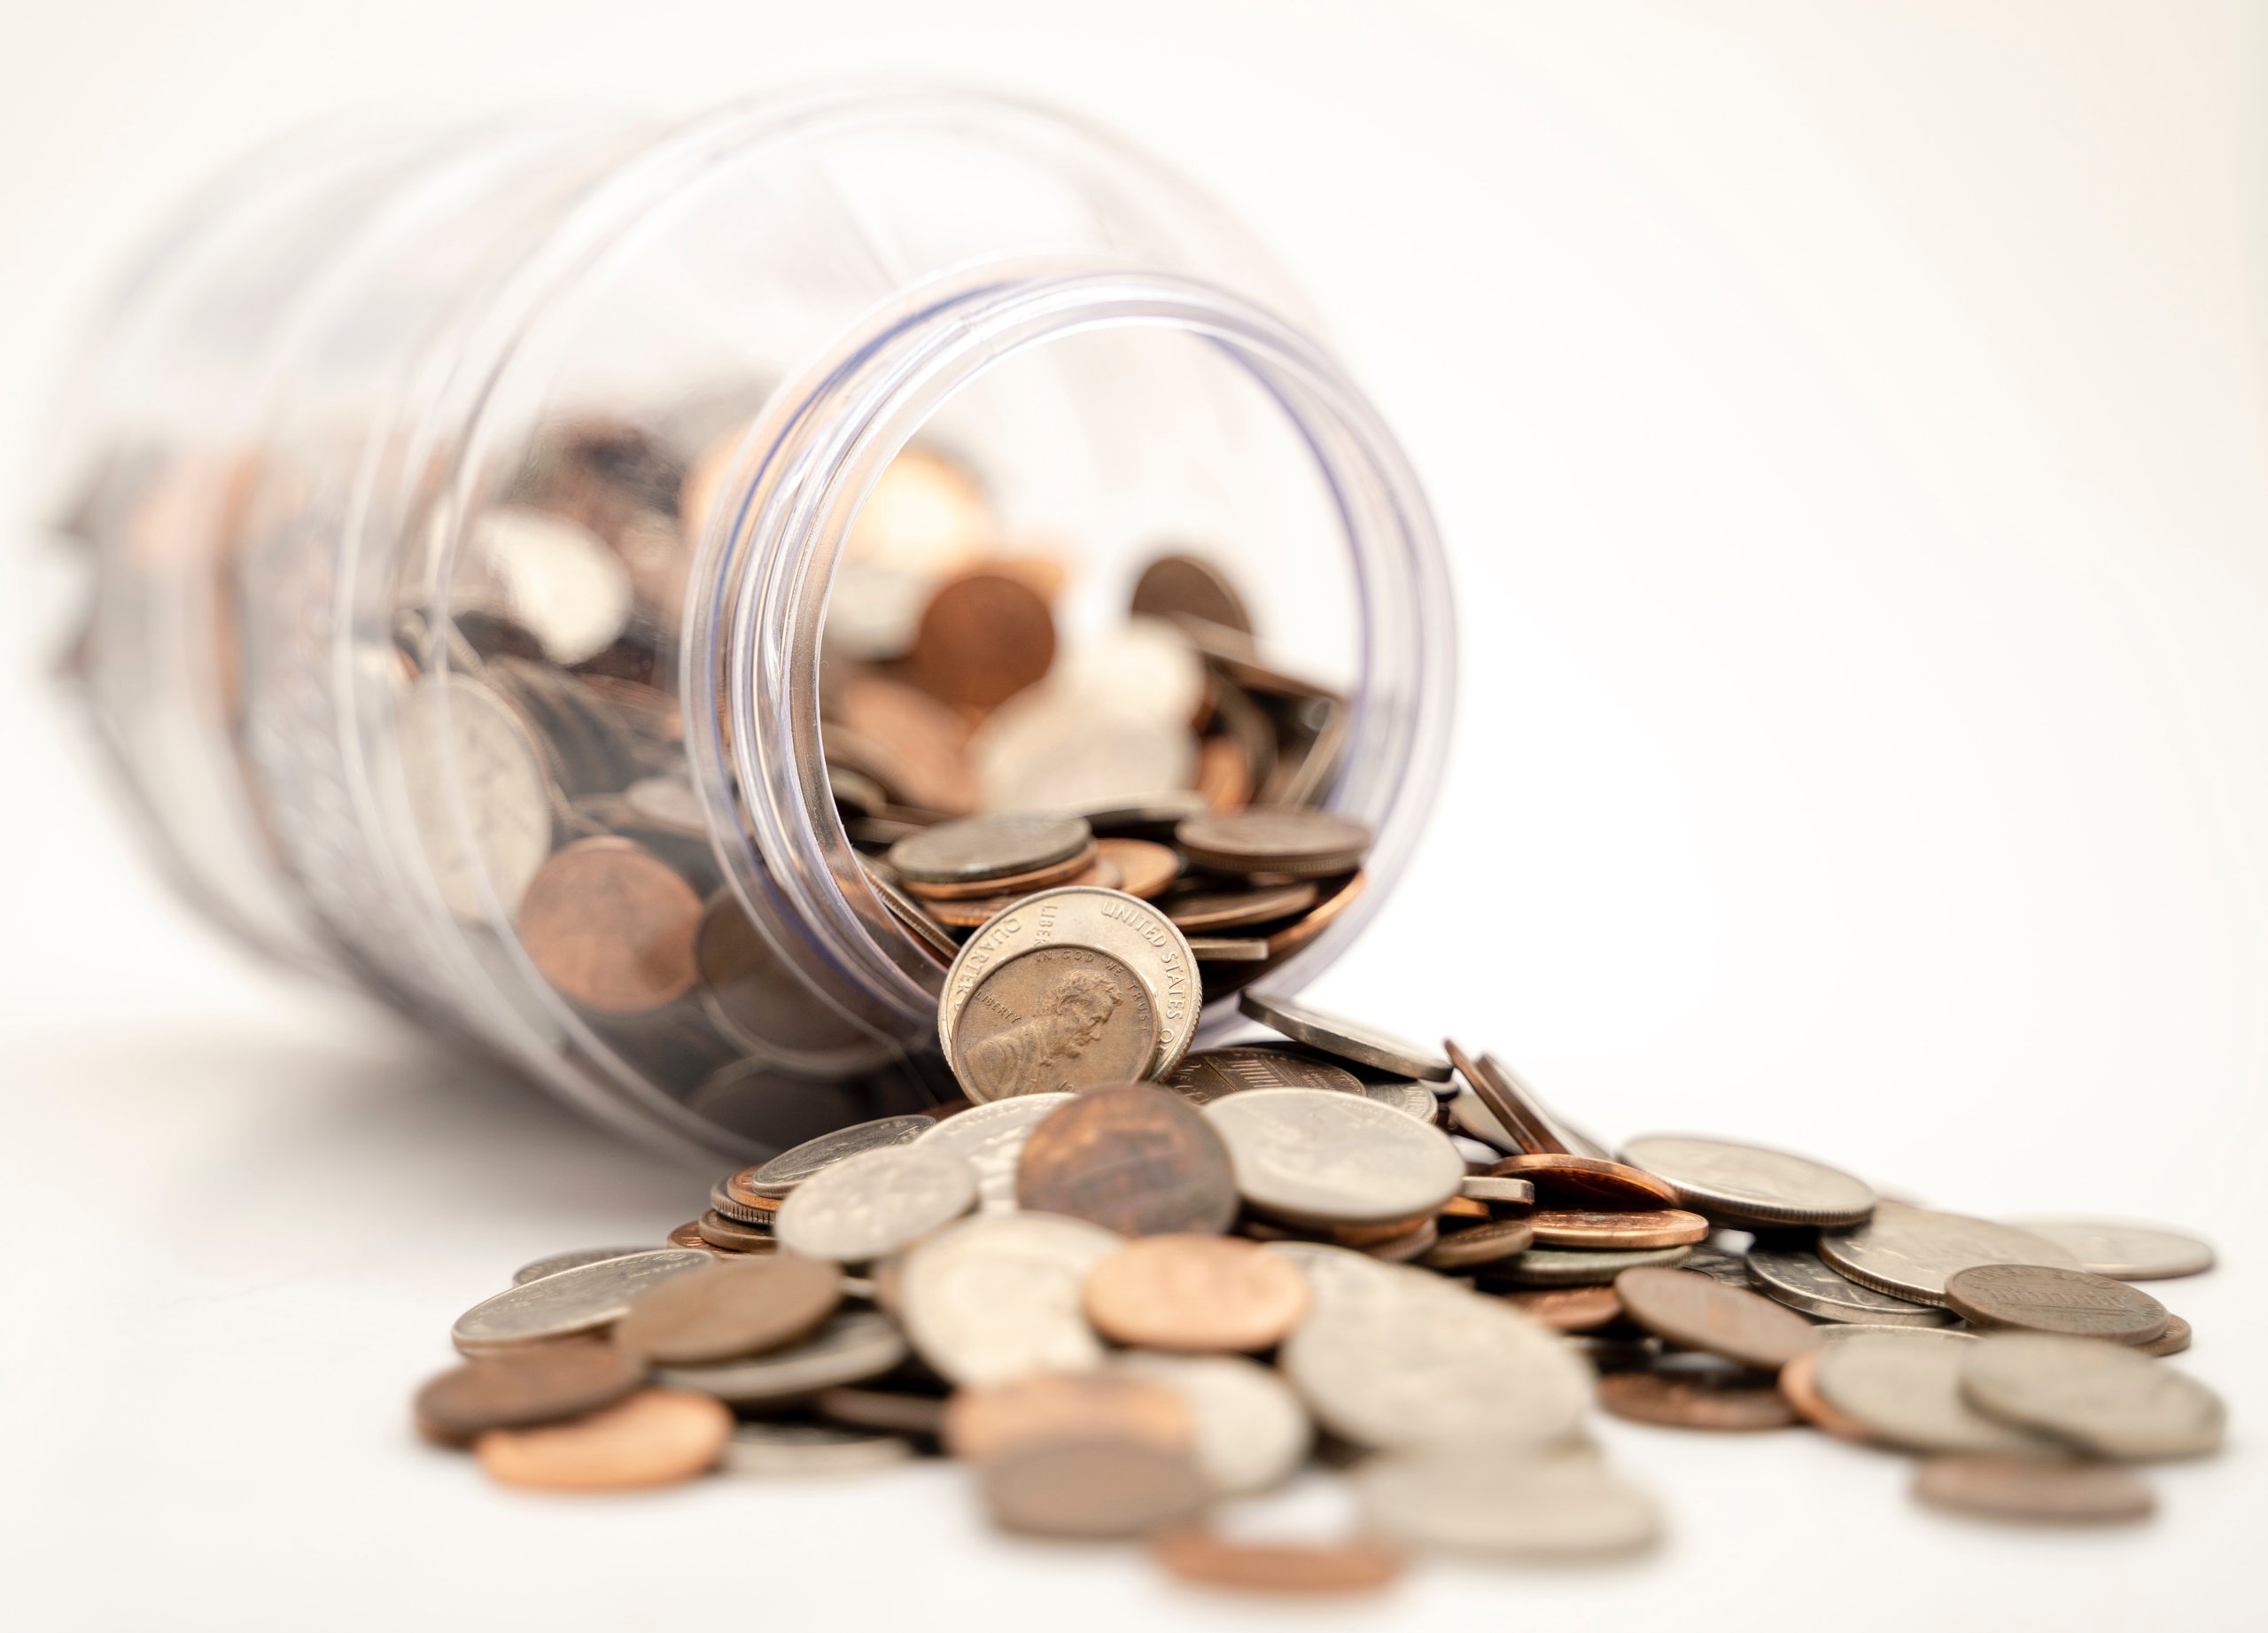 Coins in a Jar - How much will your new website cost